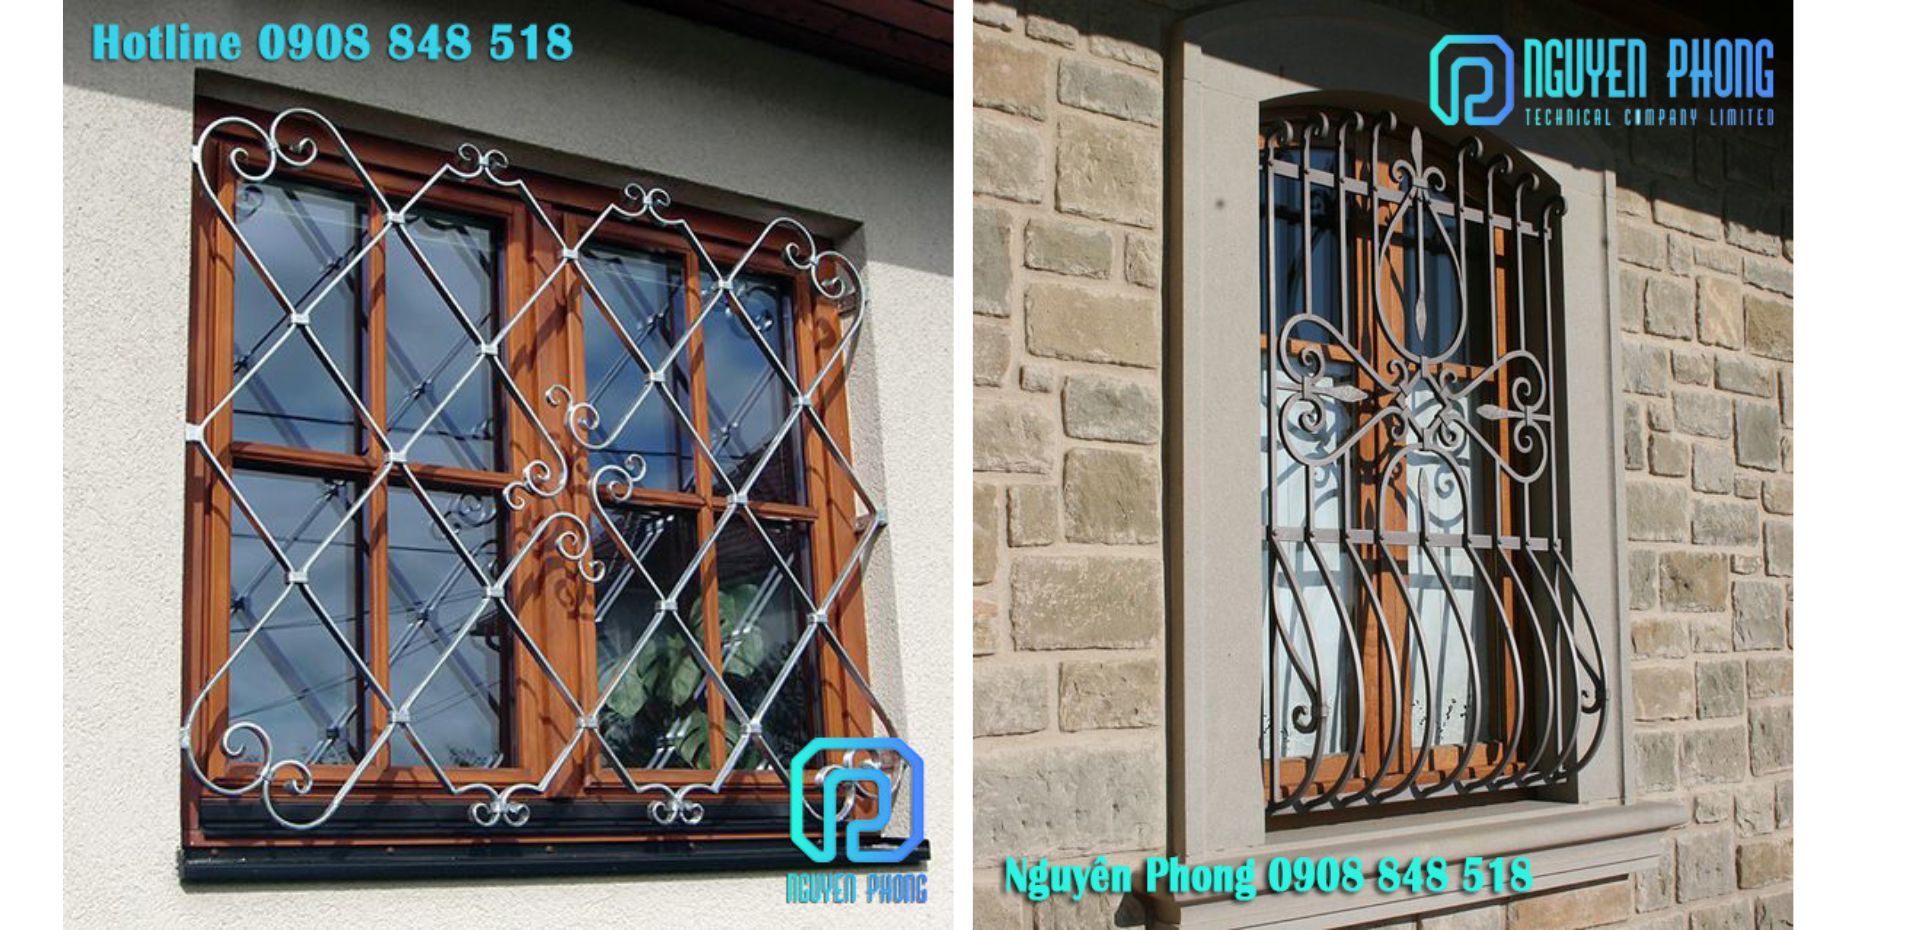 https://www.nguyenphongcnc.com/assets/images/gallery/wrought-iron grille-window.jpg